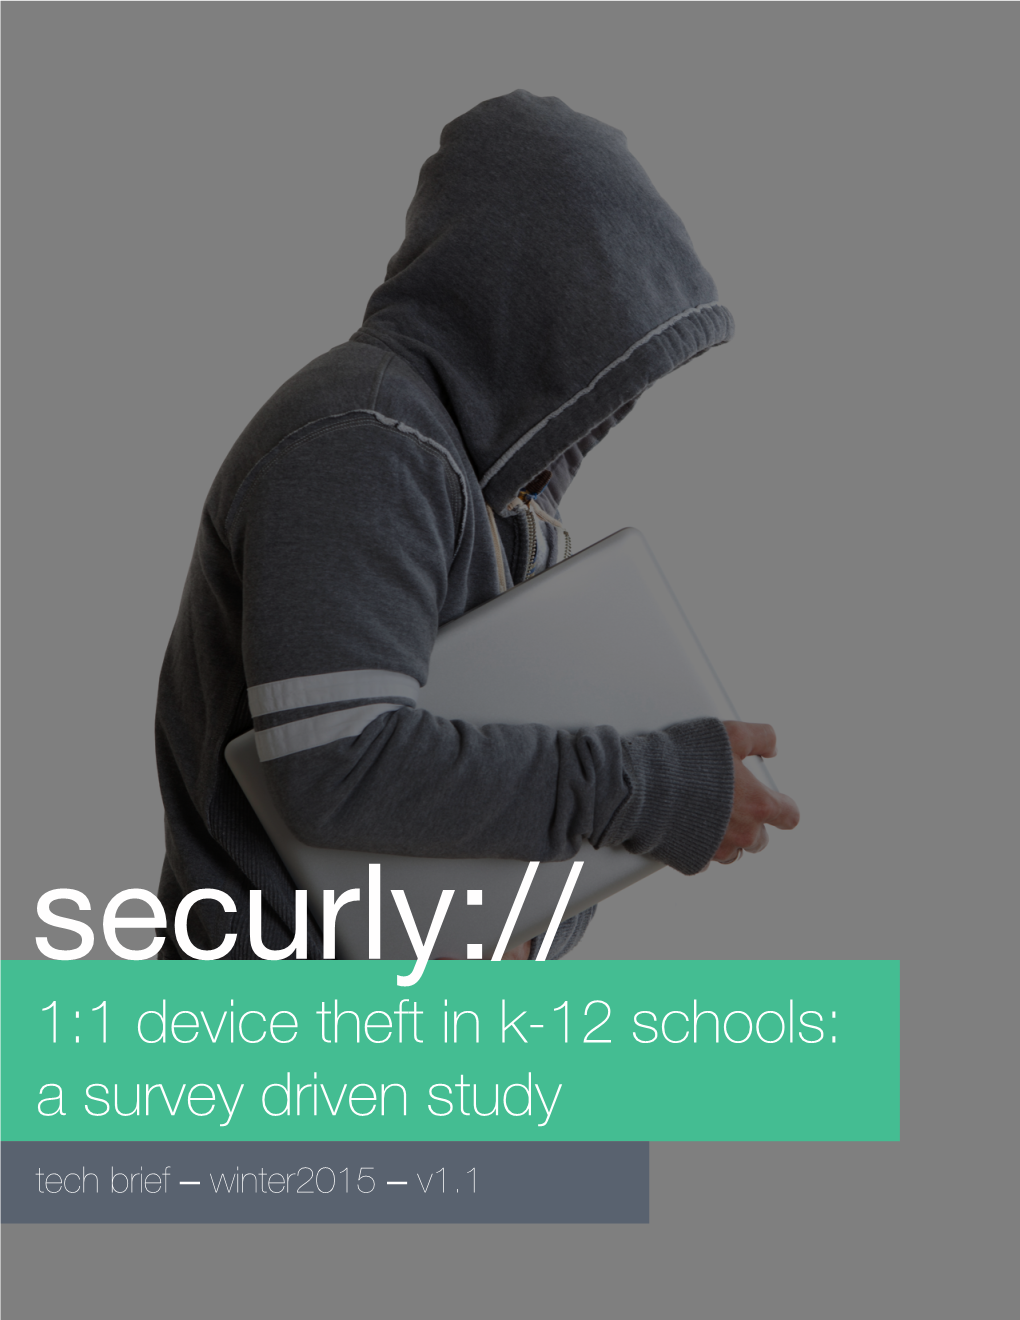 1:1 Device Theft in K-12 Schools: a Survey Driven Study